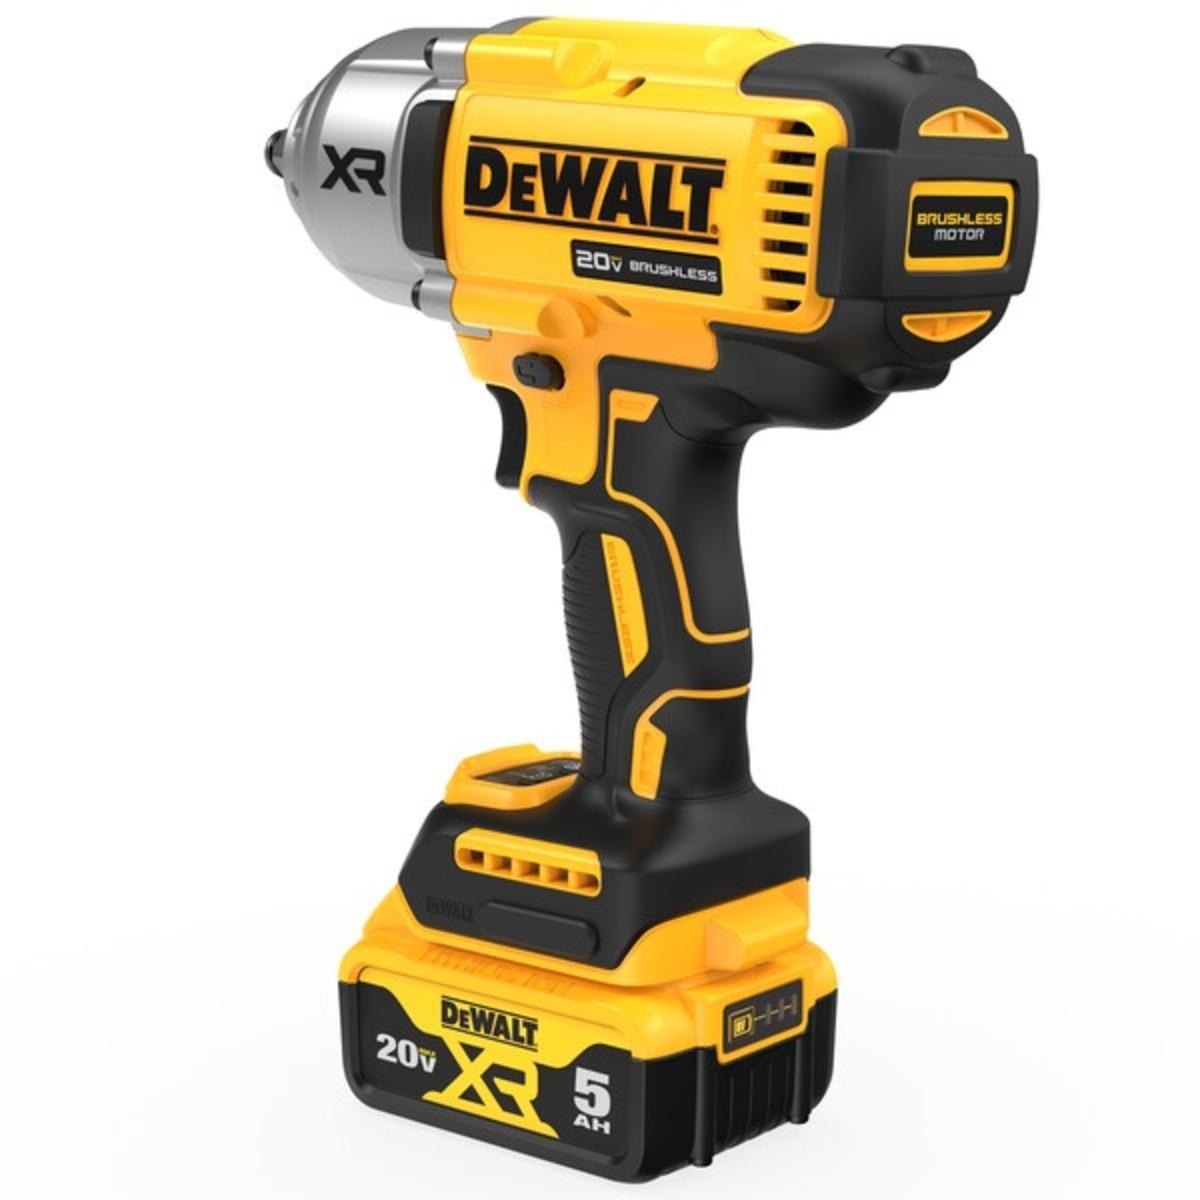 DeWalt 20V MAX* XR® 1/2 In. High Torque Impact Wrench Side View 6